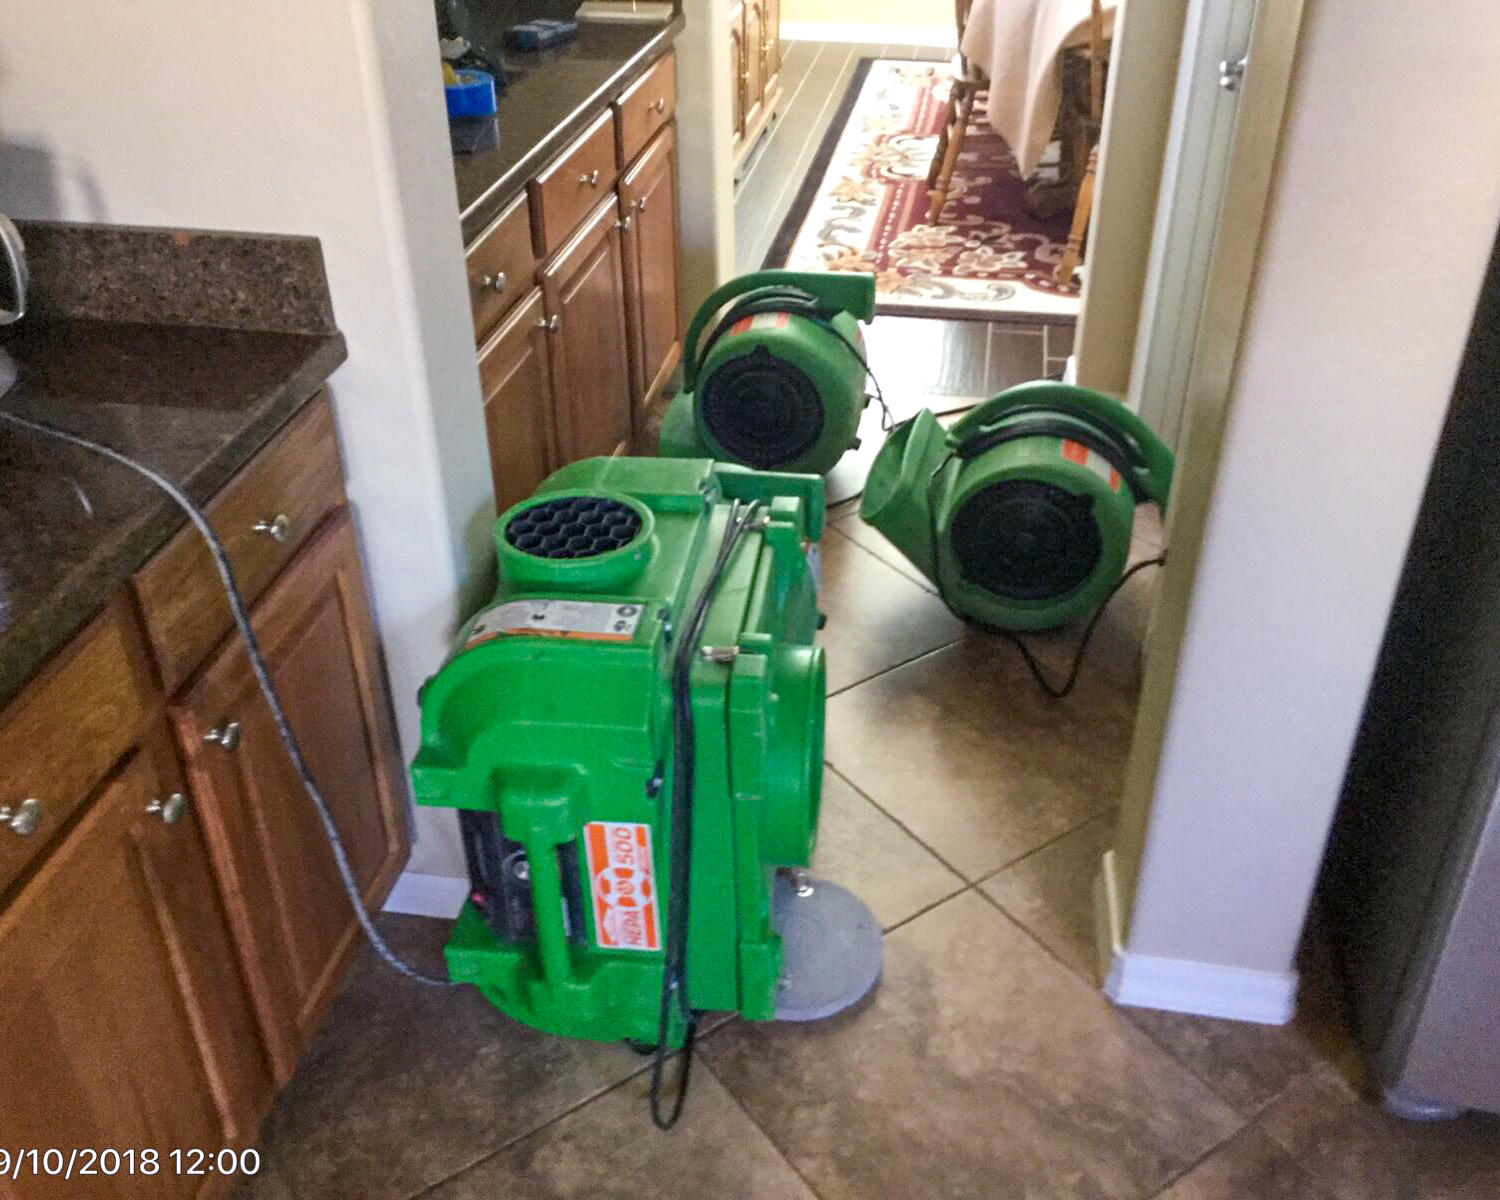 If you experience a water loss, call SERVPRO of Yavapai County